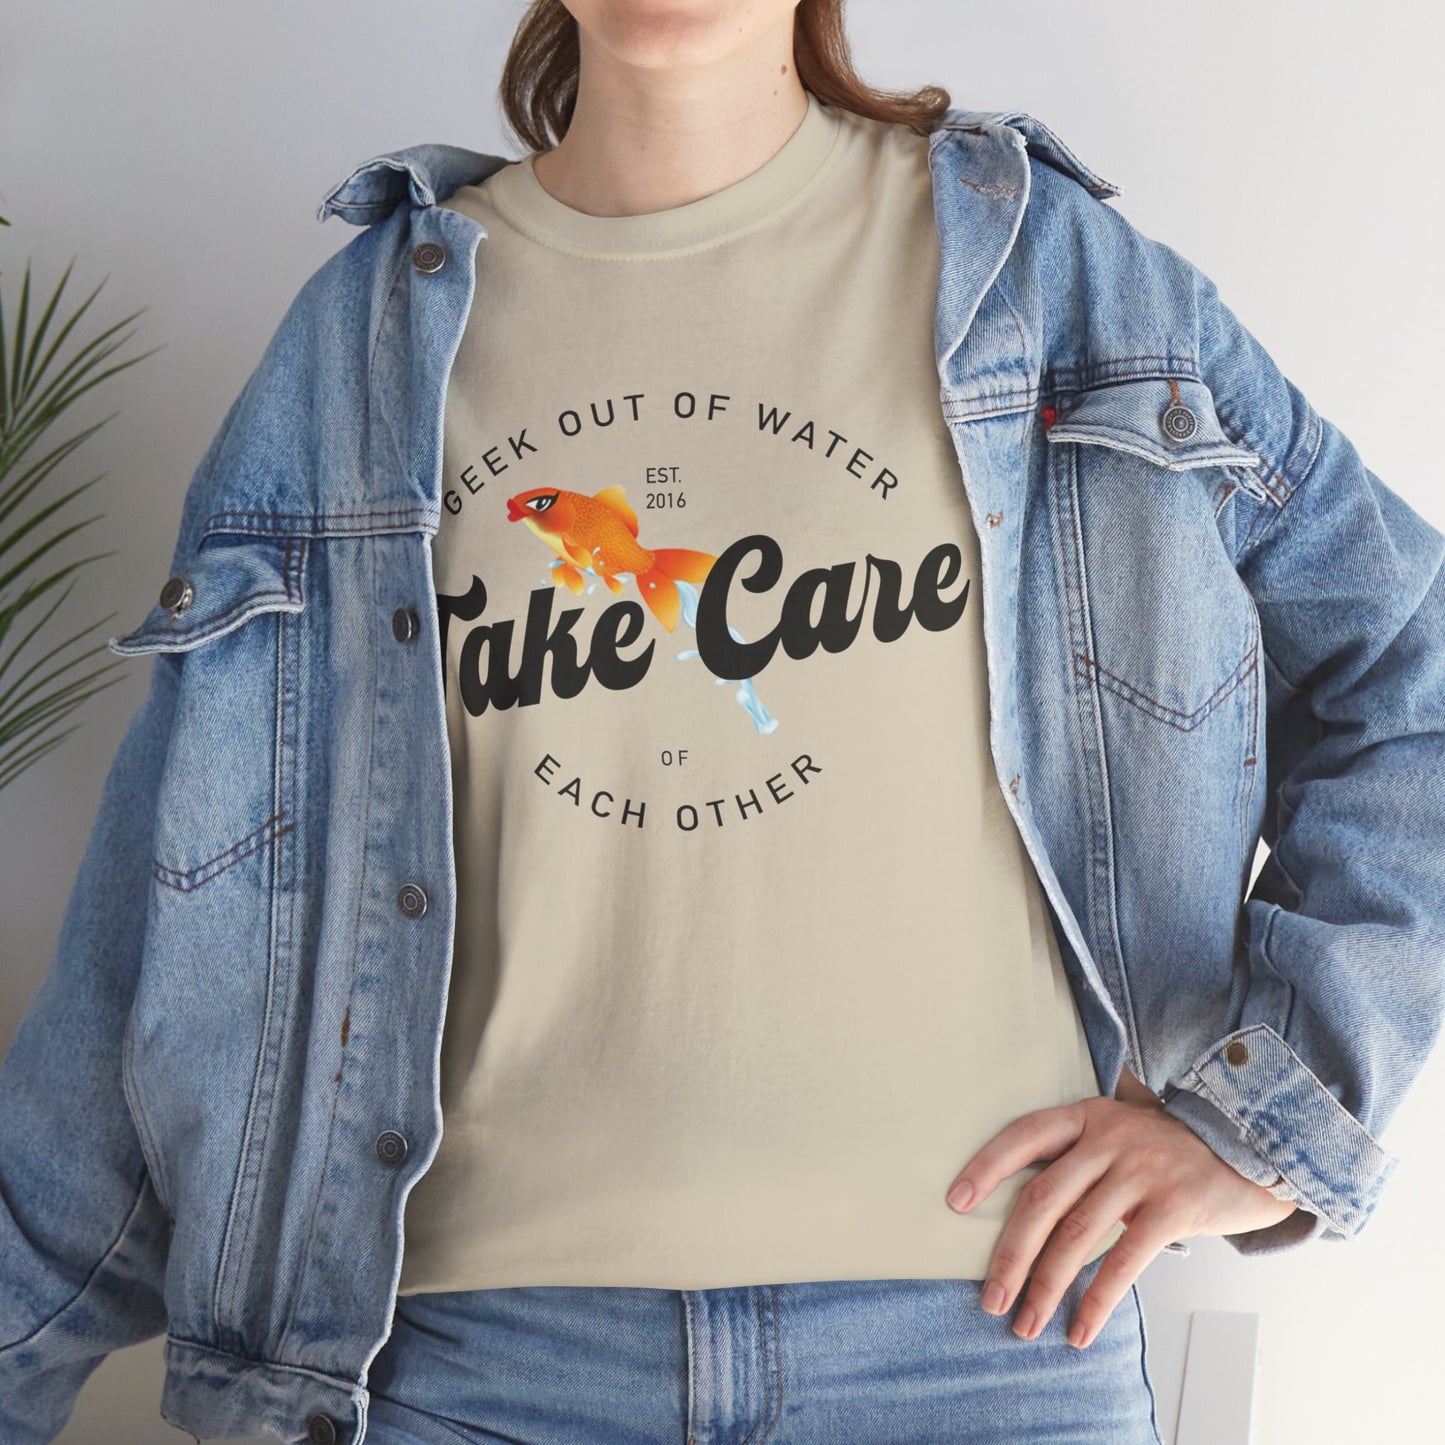 Take Care of Each Other T-Shirt, Geek Out of Water TShirt, Happy Goldfish Tee